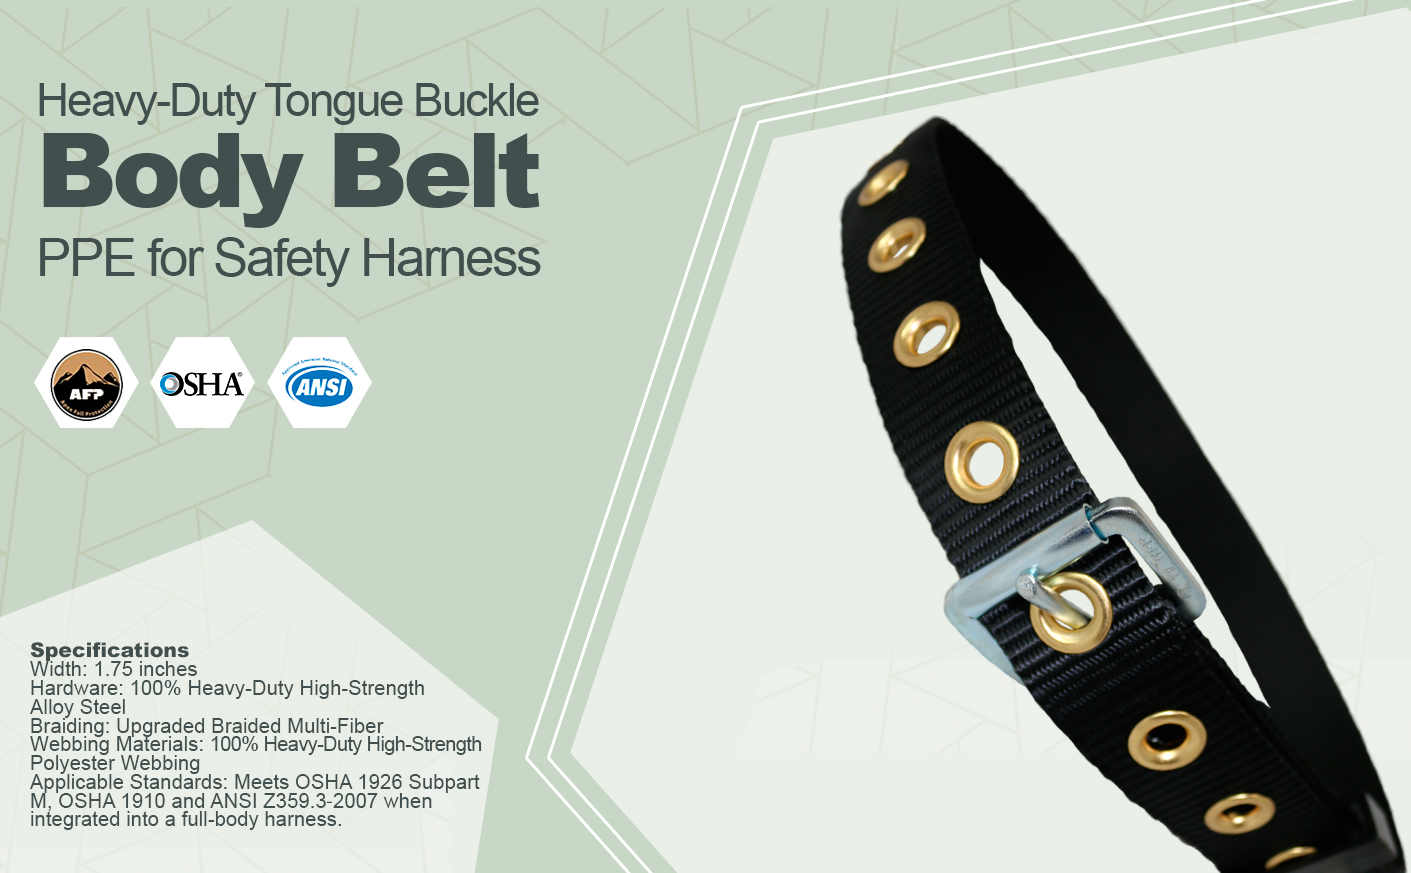 AFP Heavy-Duty Tongue Buckle Body Belt, PPE for Safety Harness, Work Positioning Restraint (OSHA/ANSI Compliant), 1.75'' Wide Quick One Safety